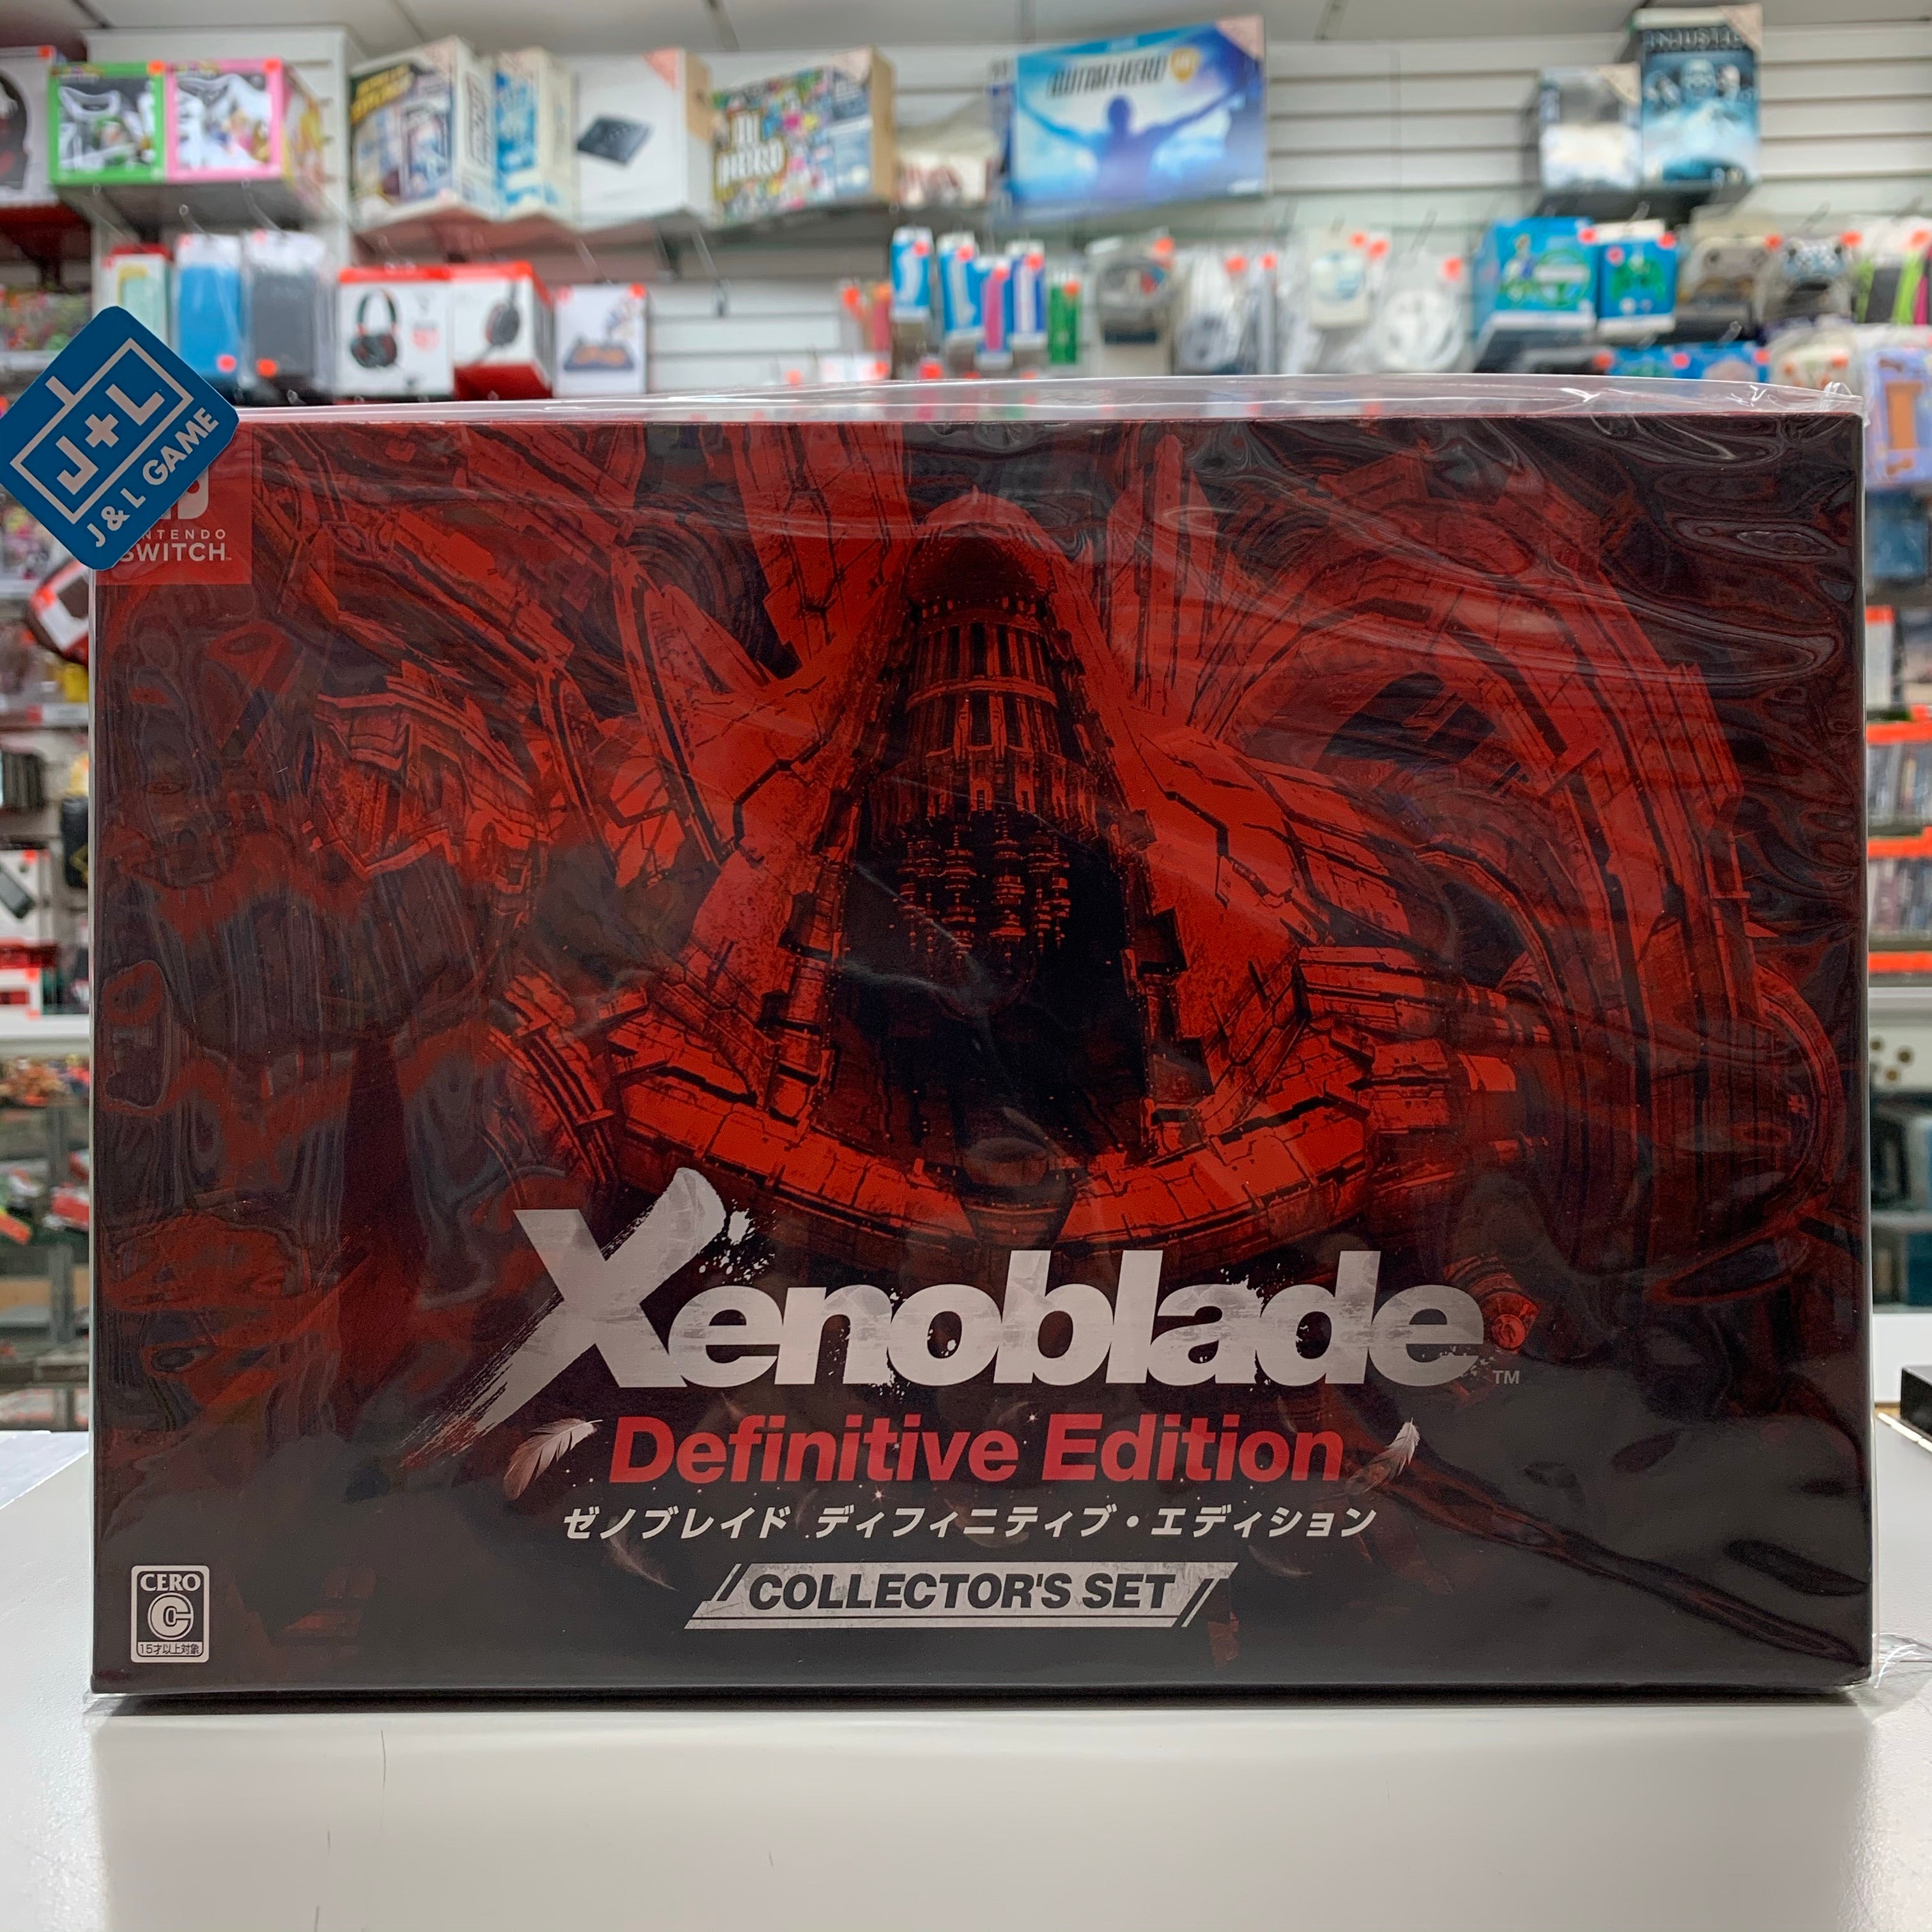 Xenoblade Definitive Edition Collector's Set - Nintendo Switch ( Japanese Import ) [NEW] Video Games J&L Video Games New York City   